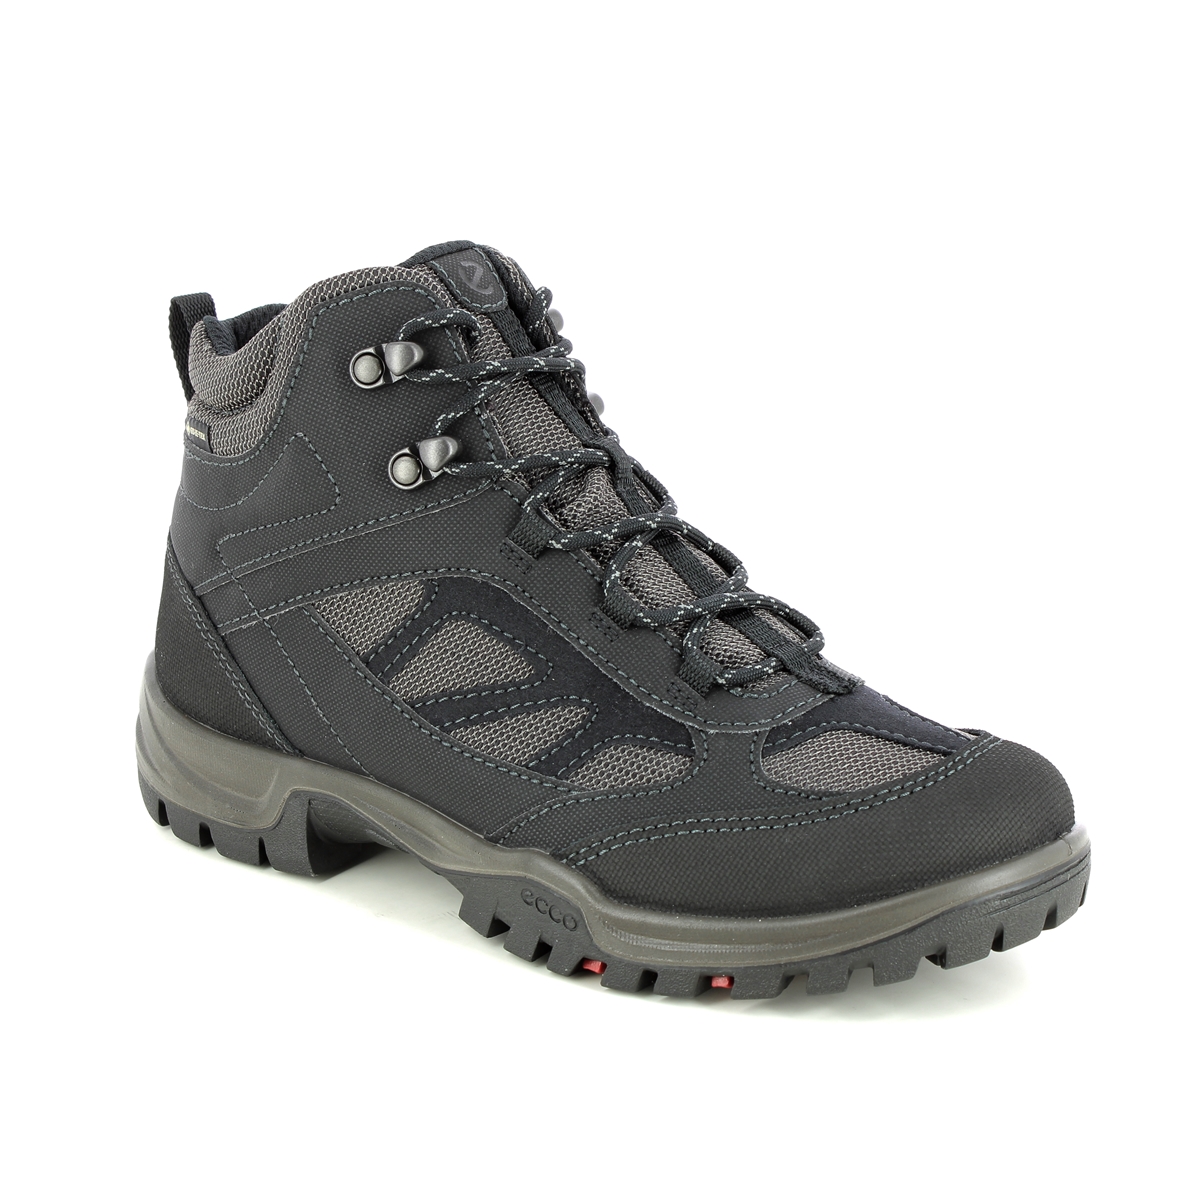 Ecco Xpedition W Mid Gtx Black Womens Walking Boots 811273-51526 In Size 41 In Plain Black